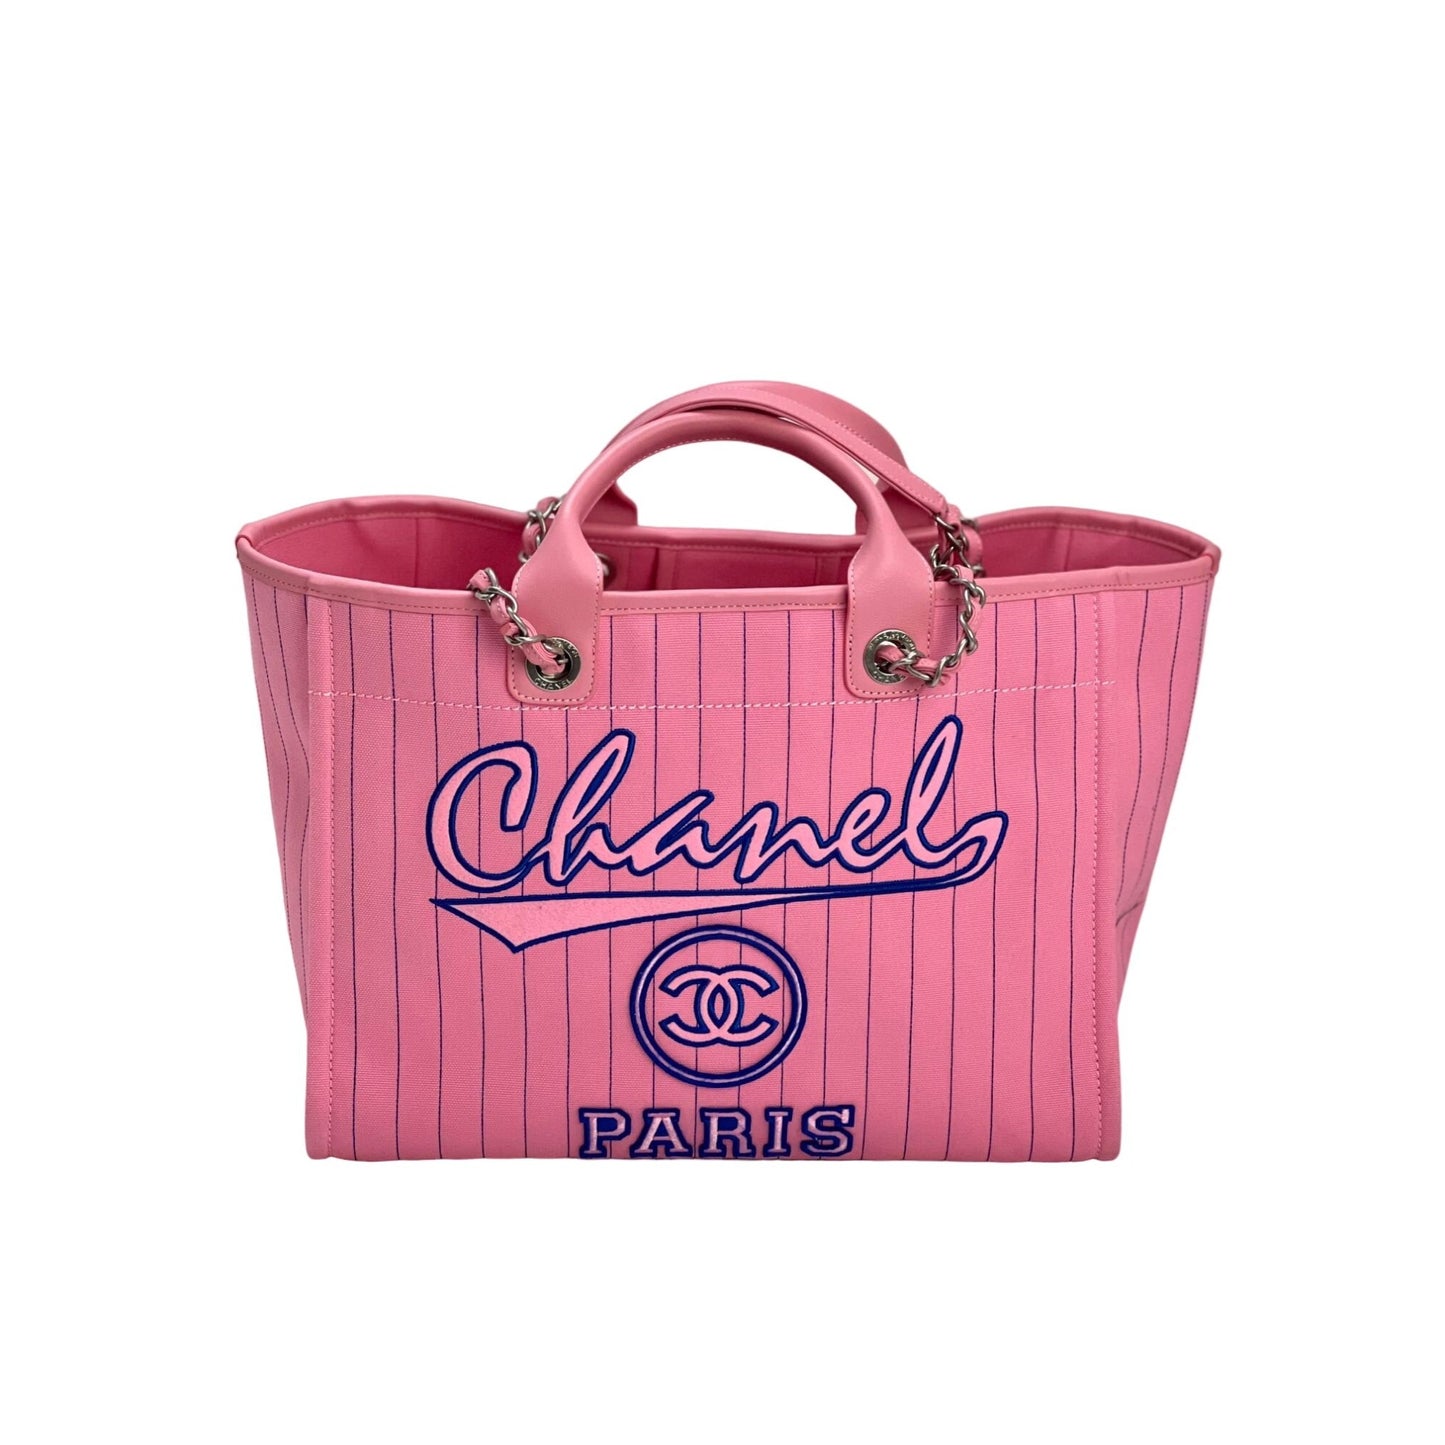 Chanel Lihgt Pink Deauville Tote Bag – The Closet